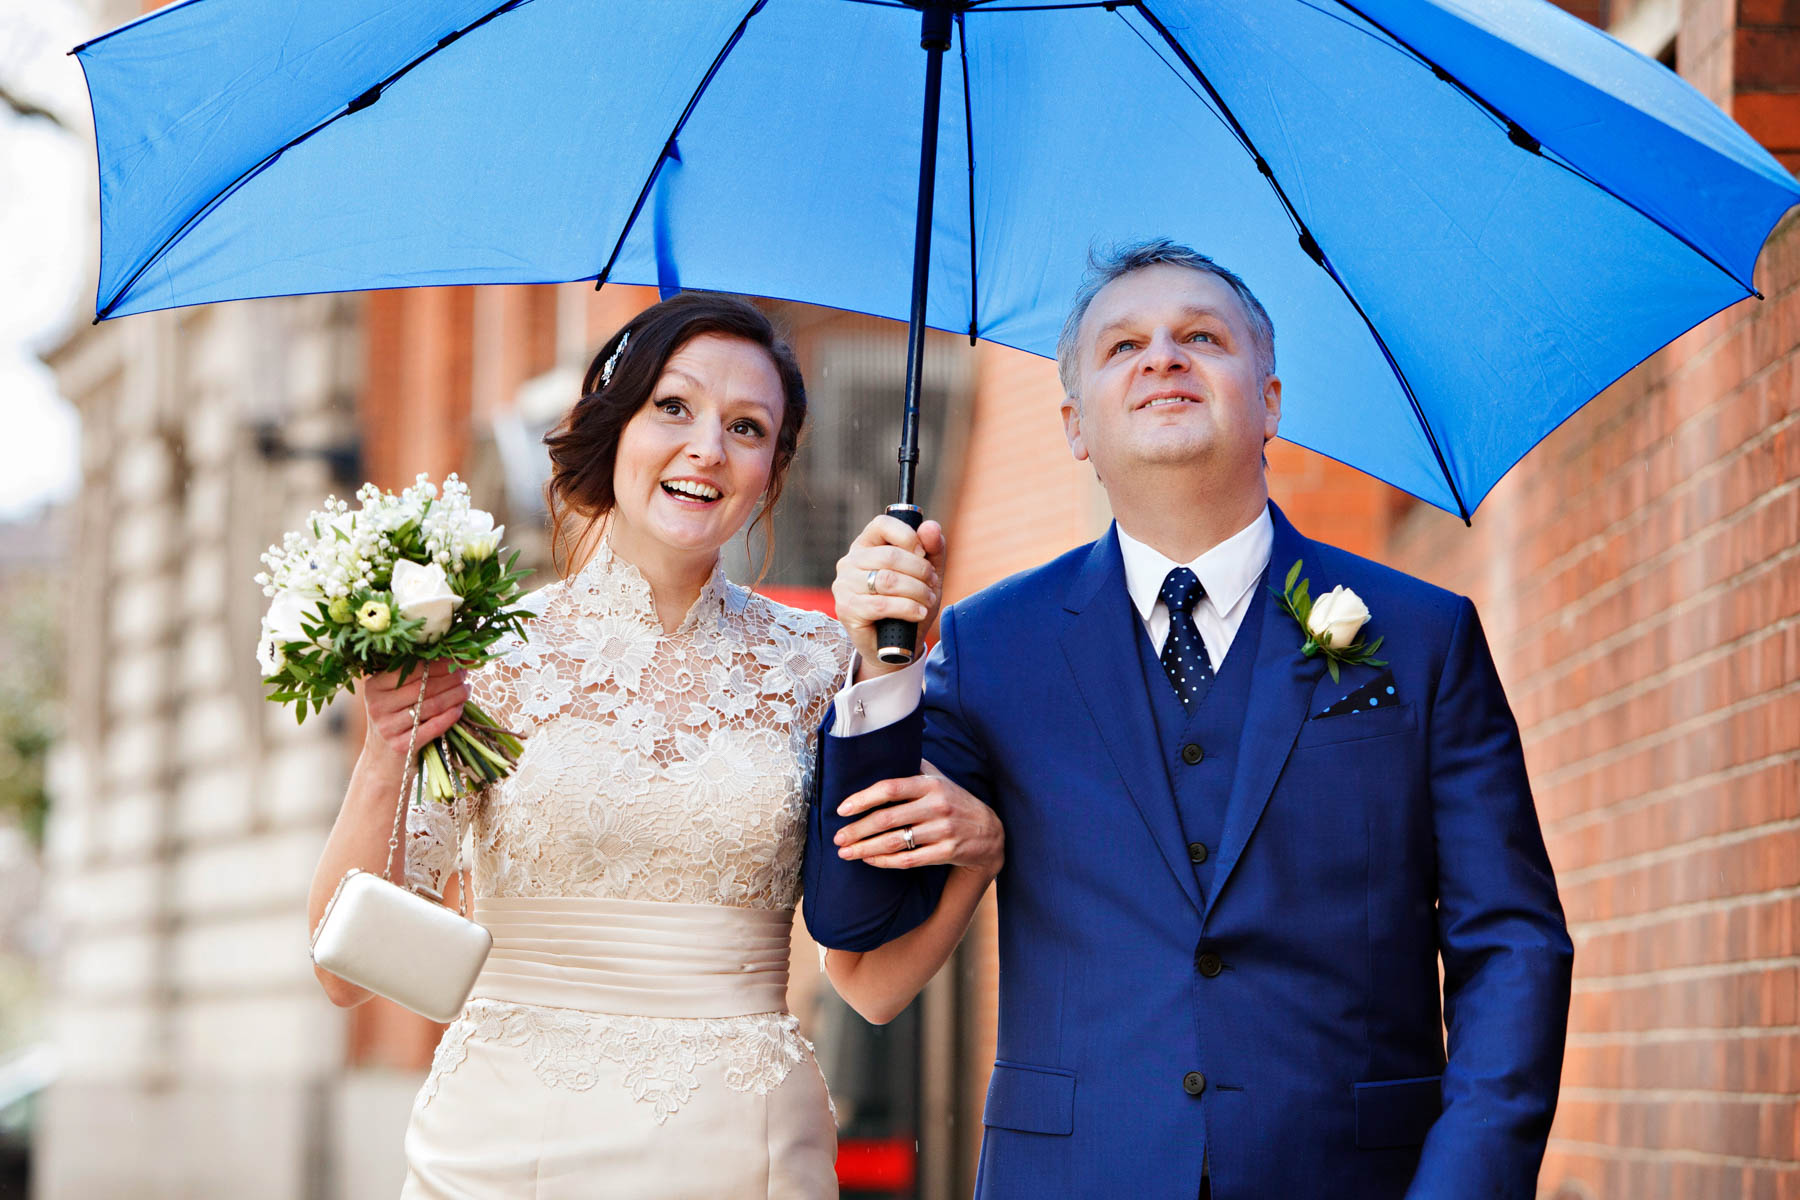 A bride and groom carrying a blue umbrella look up at the sky as it rains on their wedding day. But they are not letting the wether spoil their fun or detract from the joy of their Chelsea Register Office wedding.